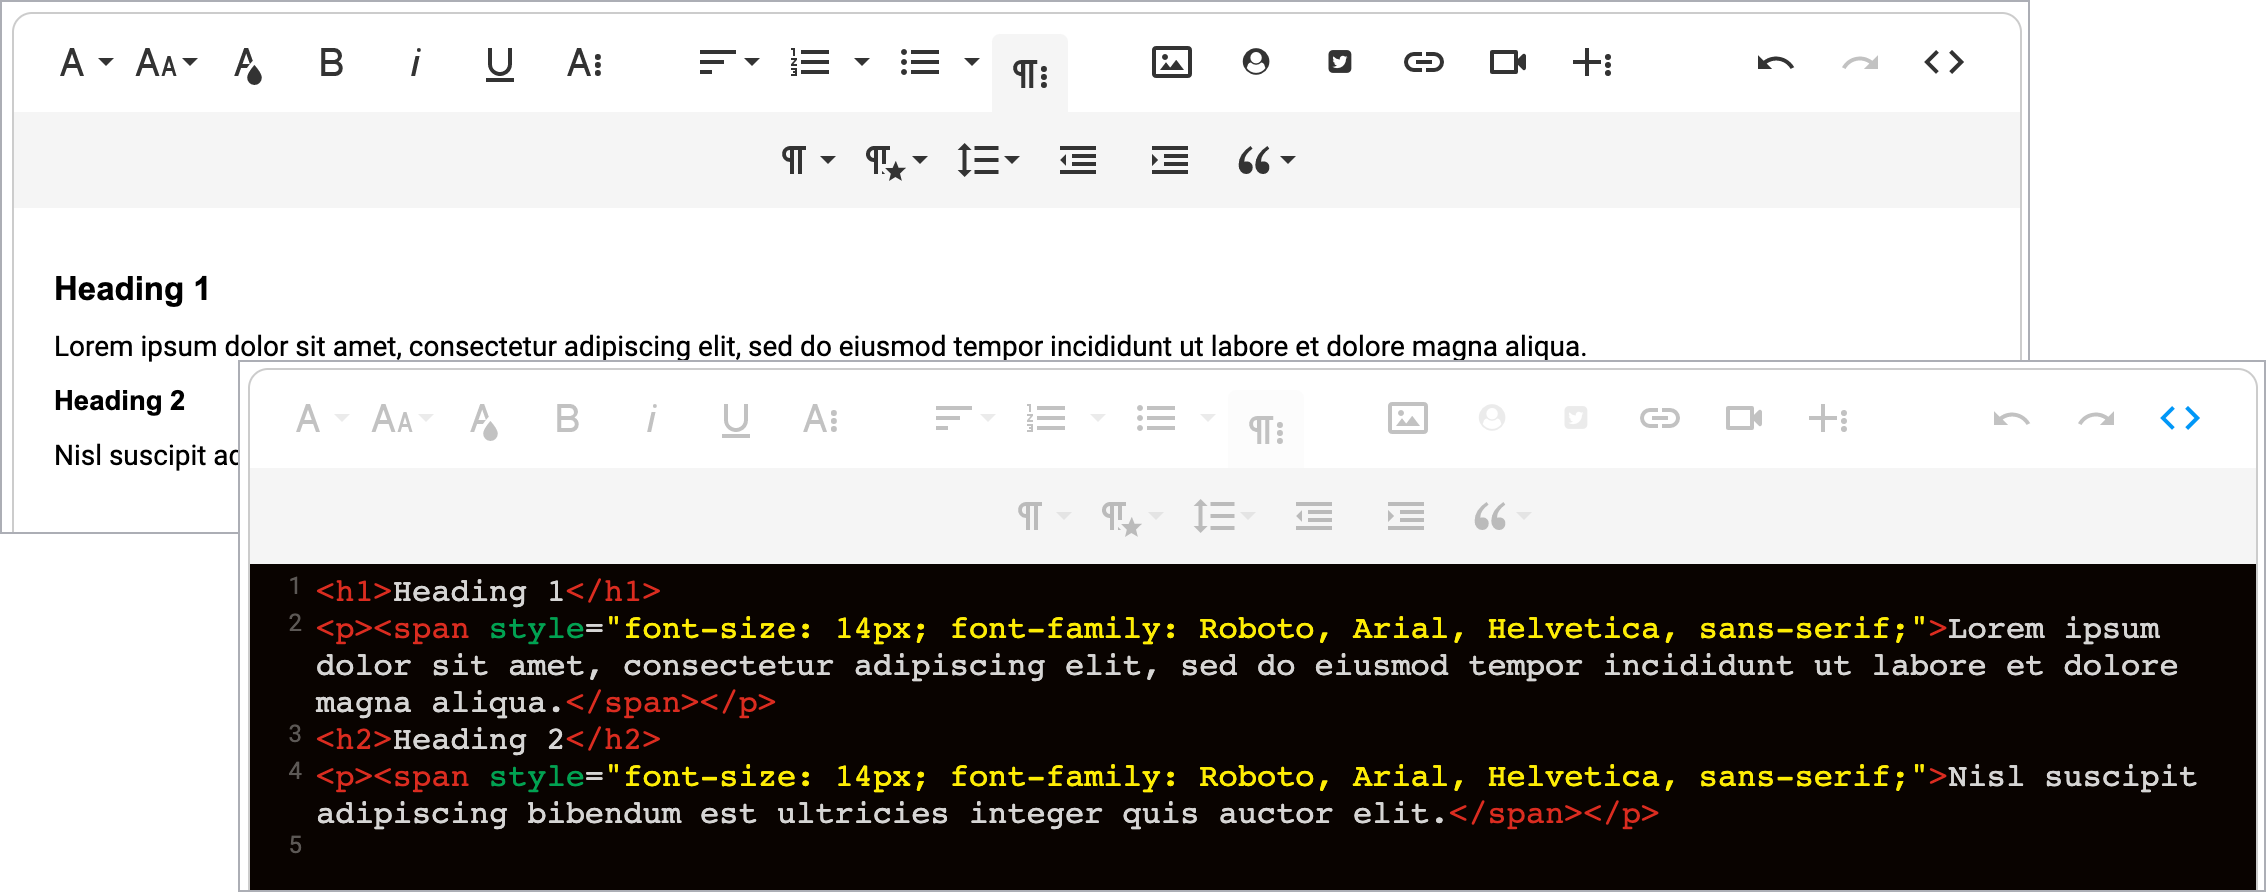 Text editor shows visual editor view and source code view